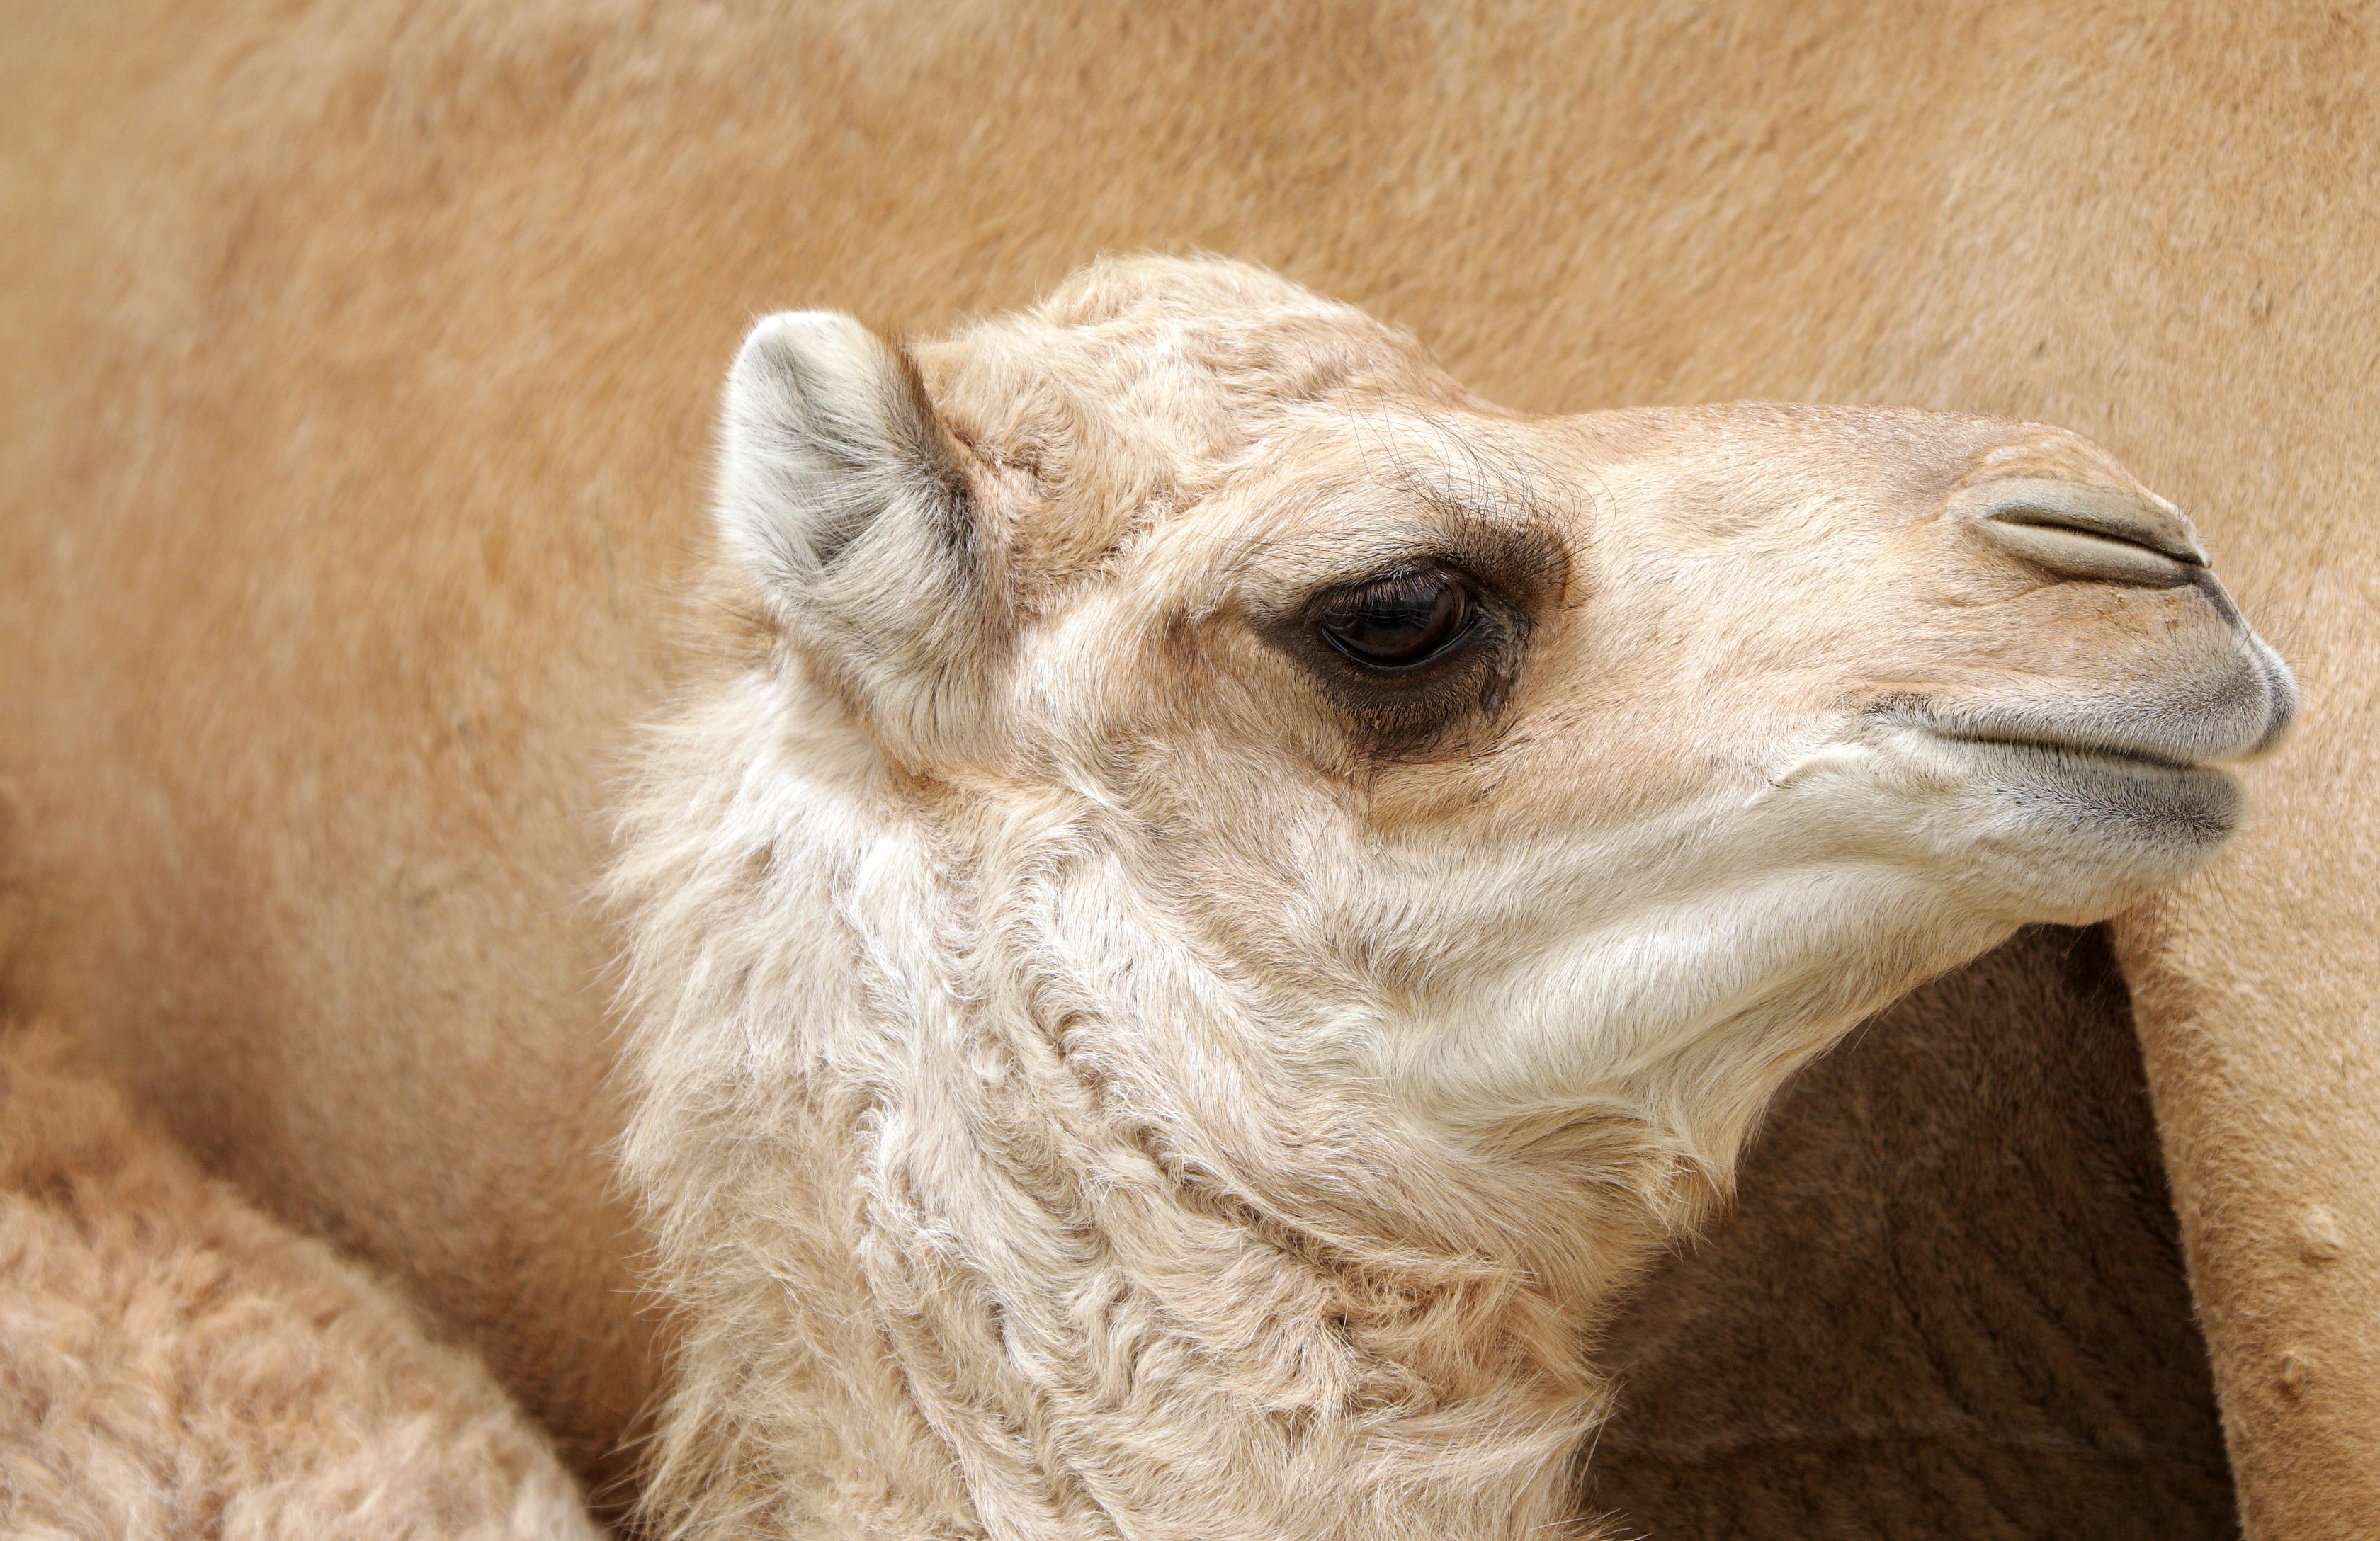 Camel Milk...A Superfood for Beauty and Anti-Aging Skincare